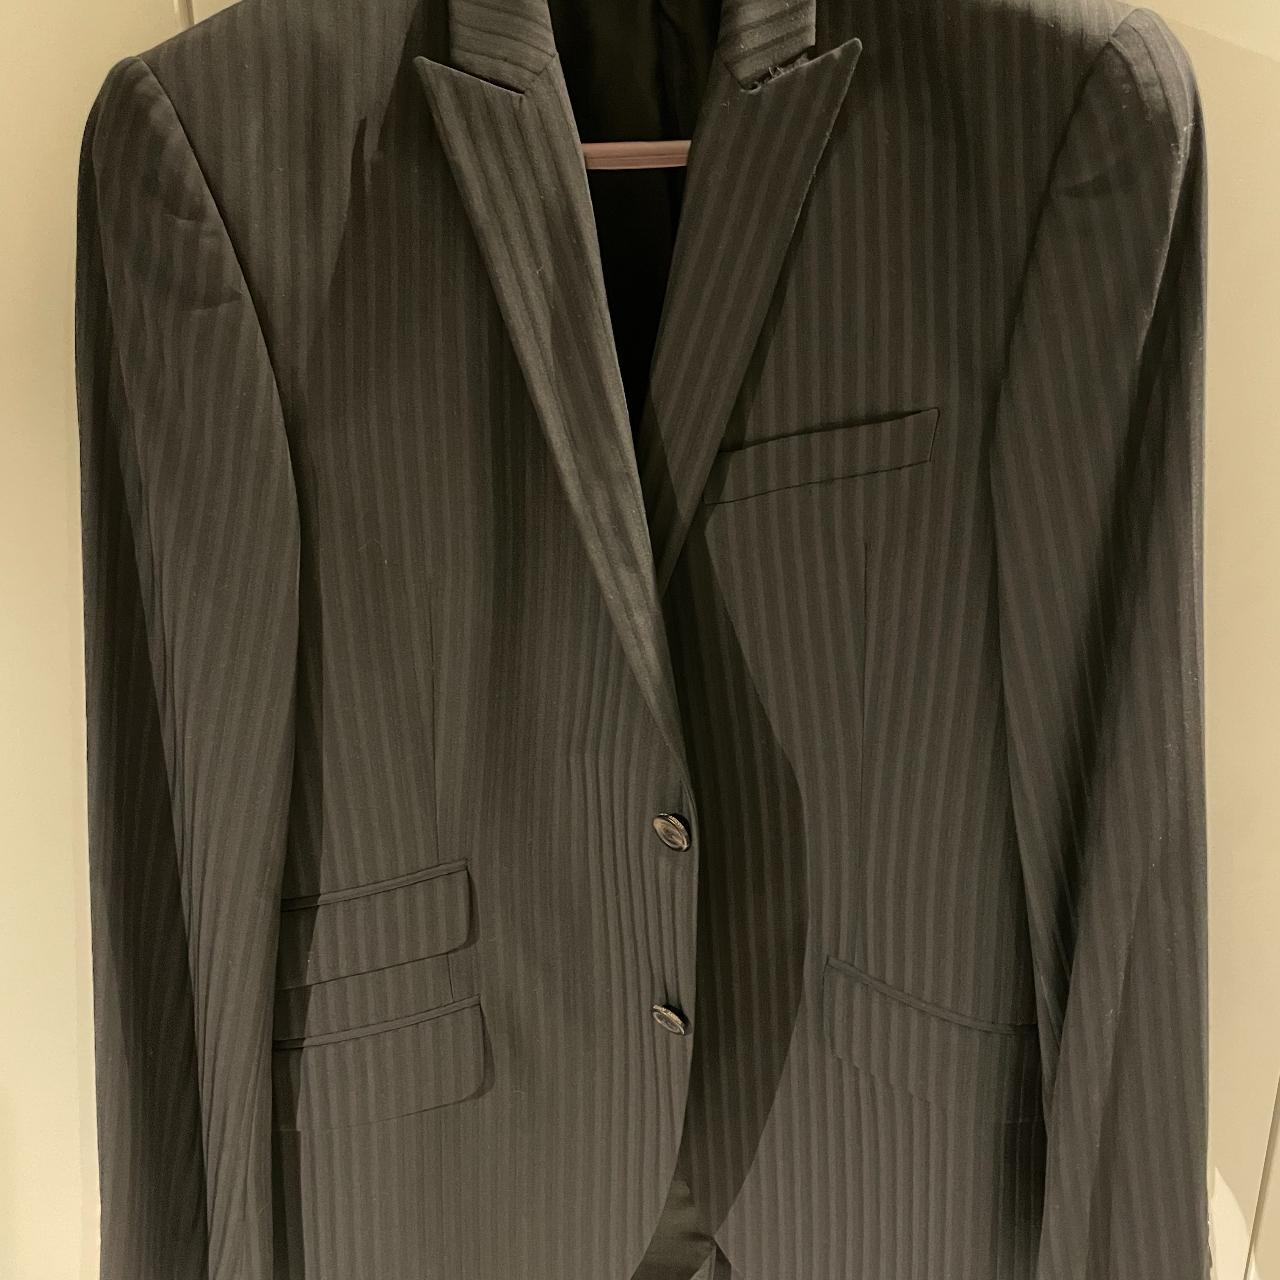 Stunning Hardy Amies Suit from their old Saville Row... - Depop